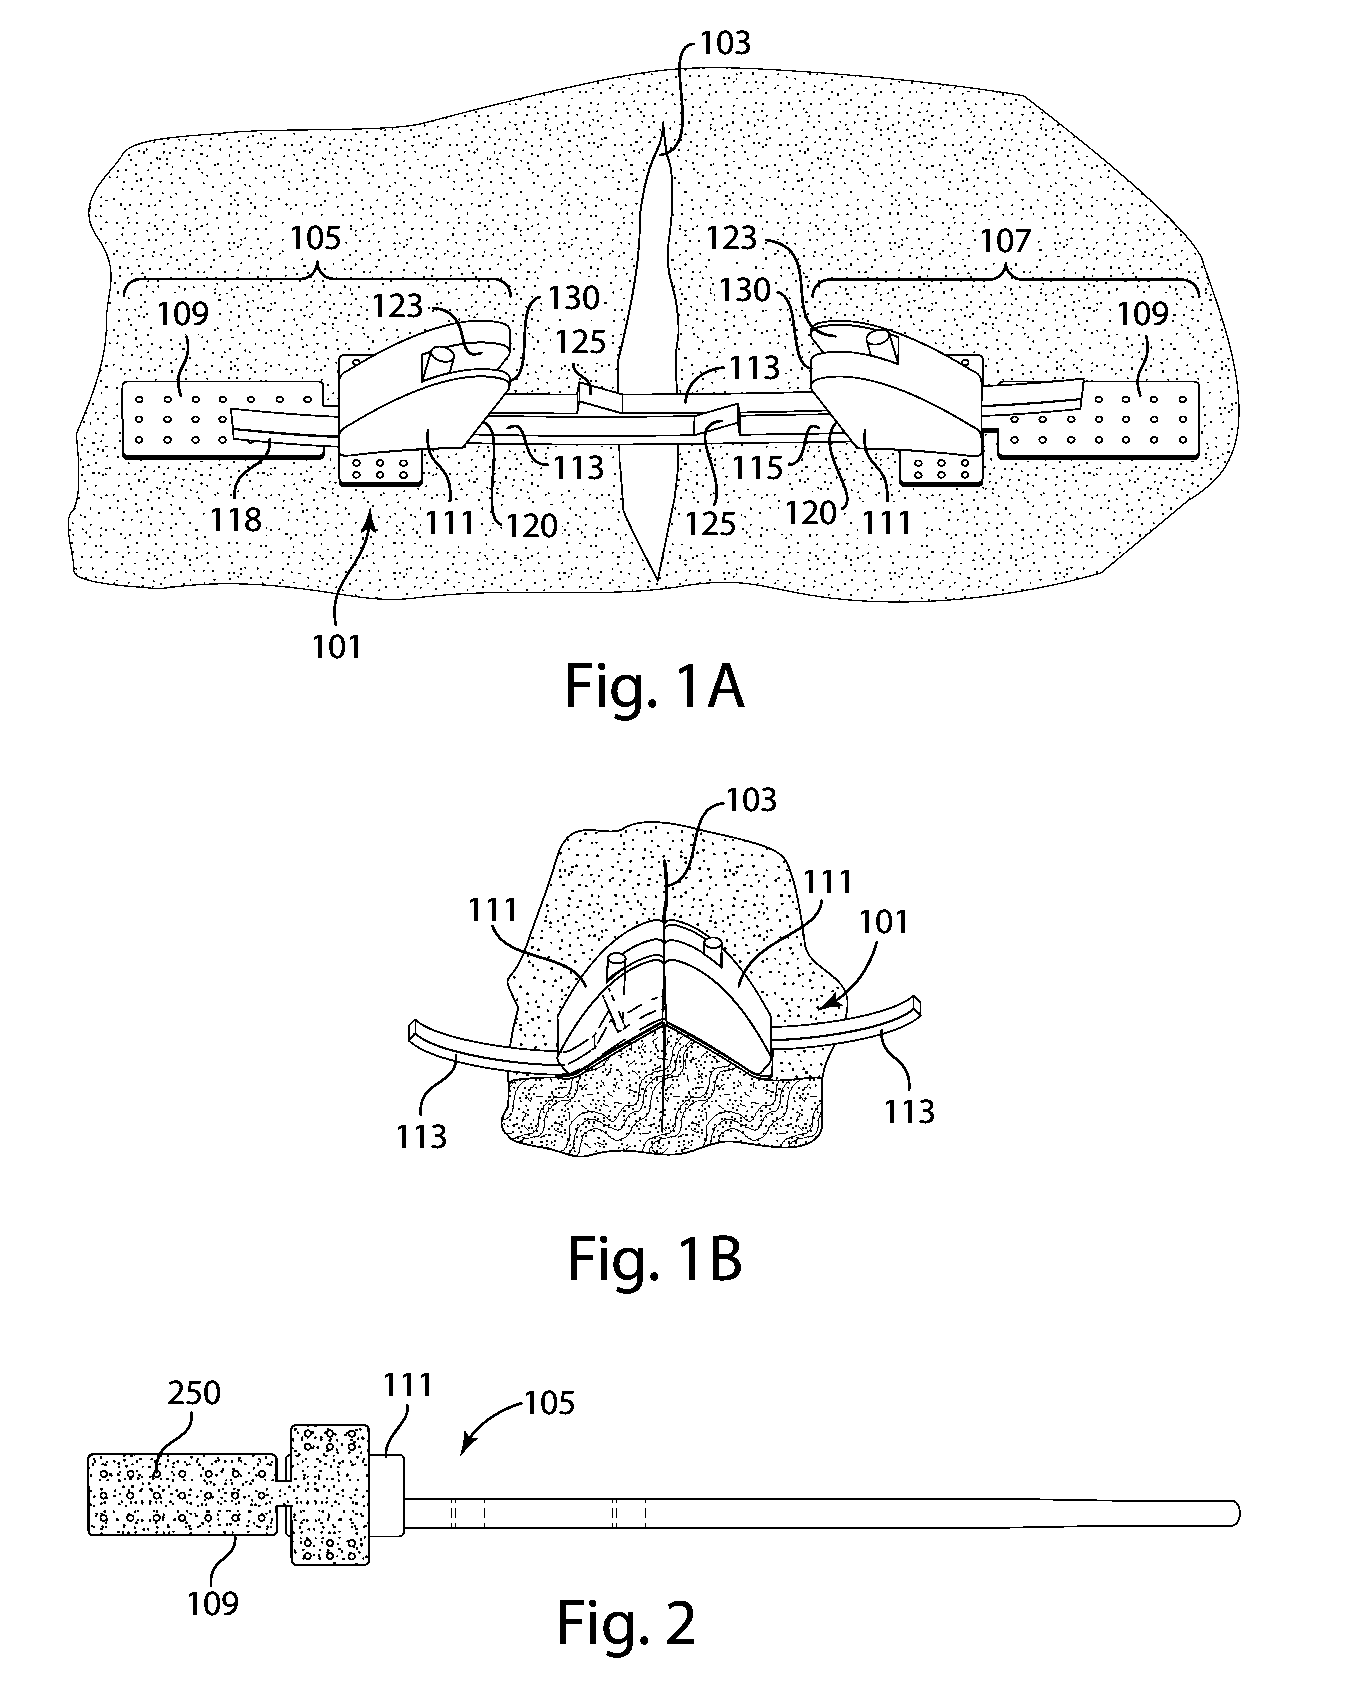 Devices for securely closing tissue openings with minimized scarring